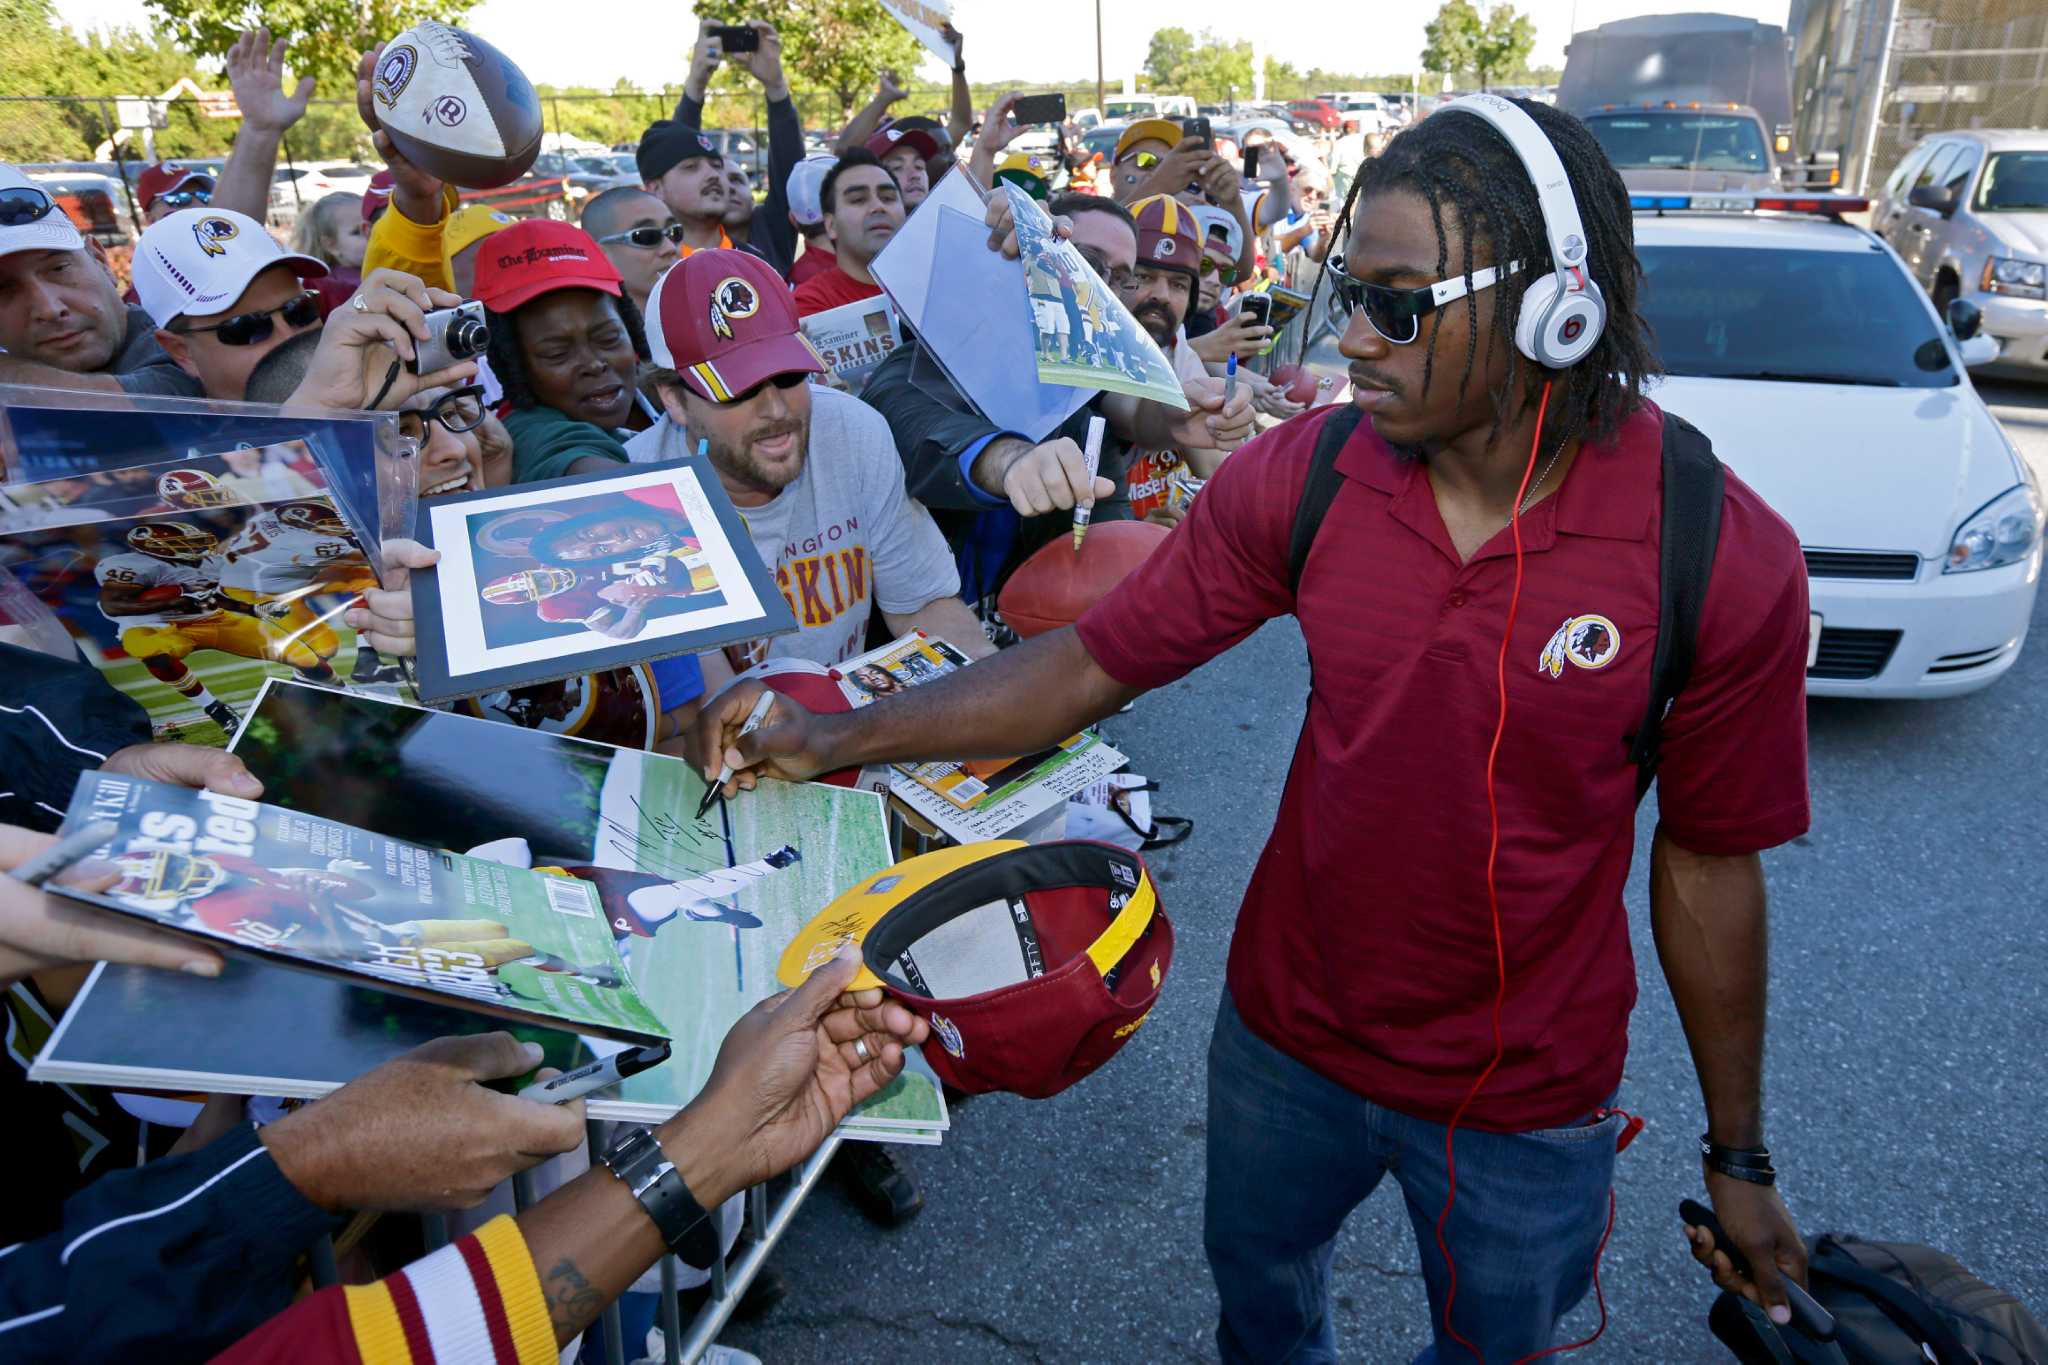 Robert Griffin III Is Speaking Up And Doesn't Plan to Stop